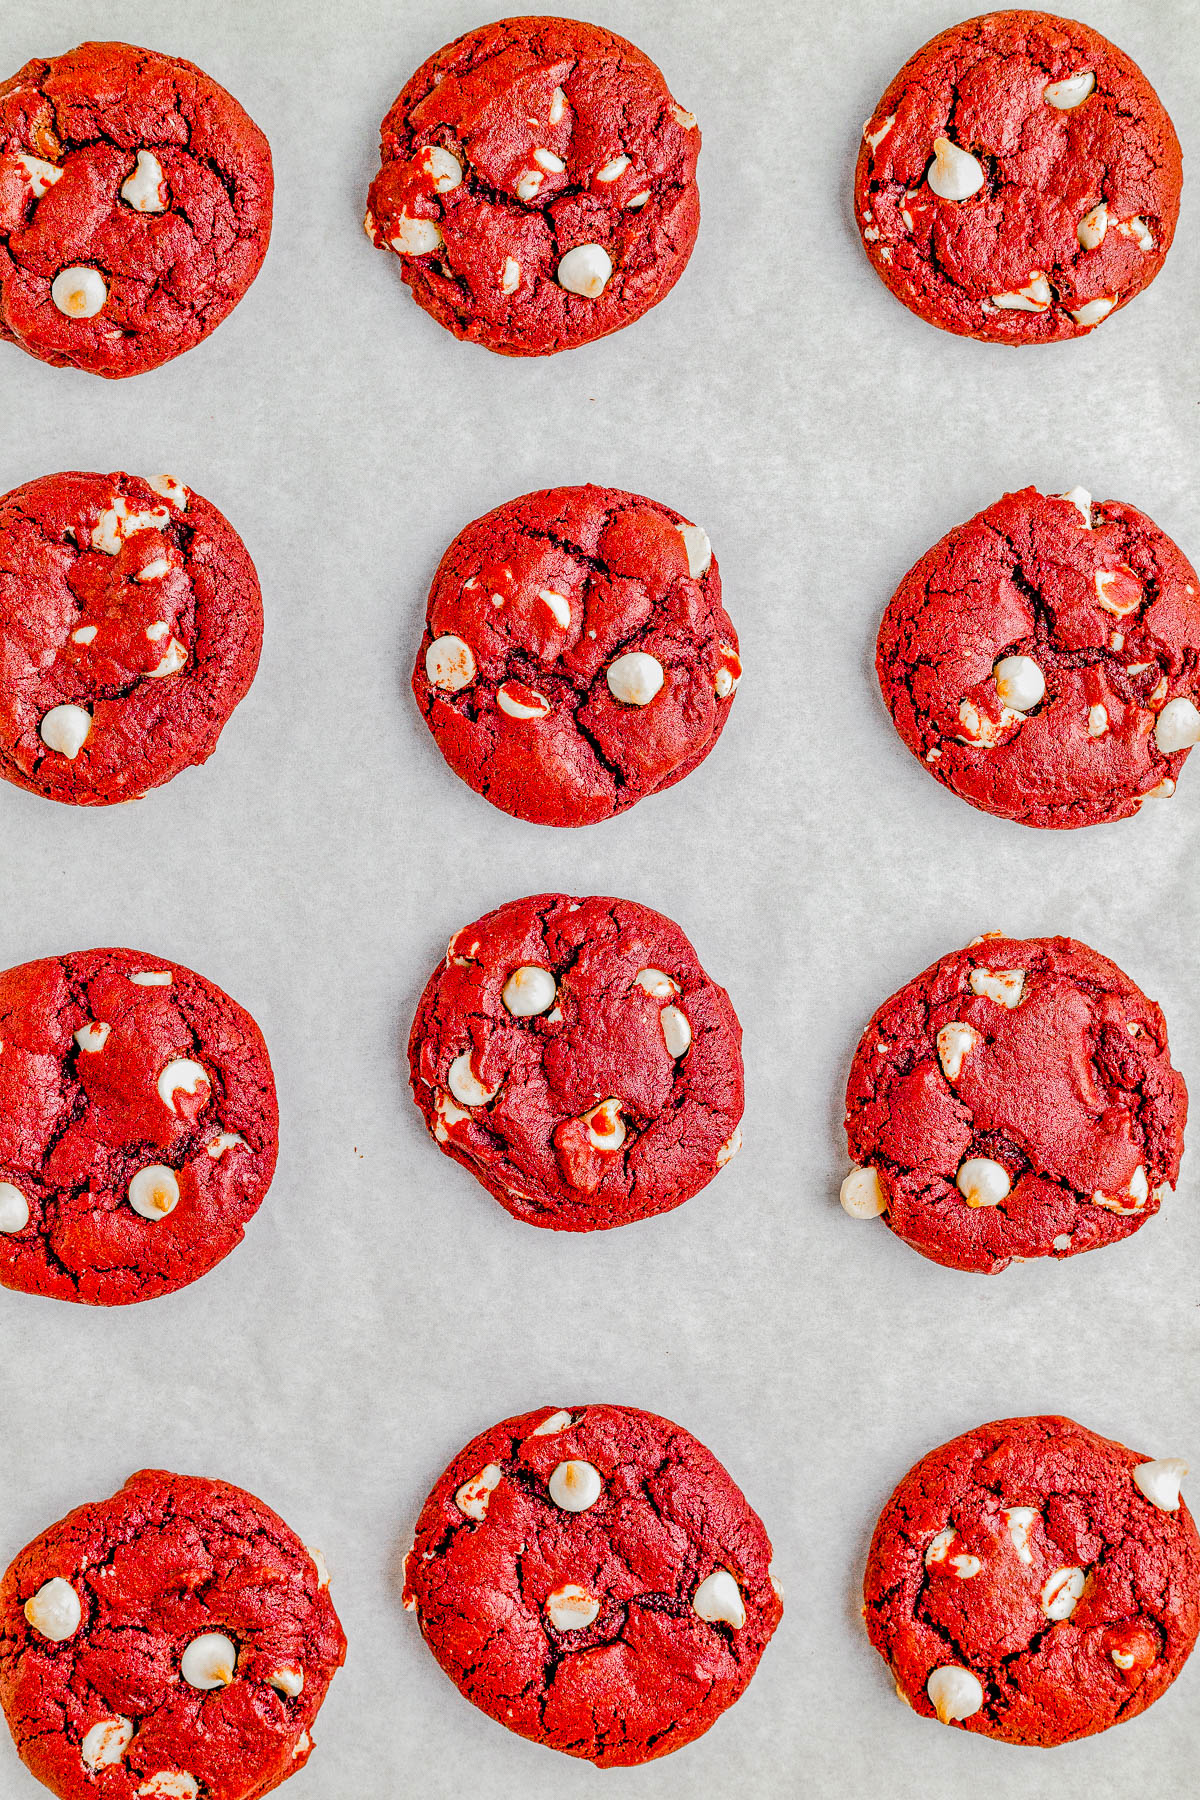 Red Velvet Cookies — Soft and chewy red velvet cookies that are loaded with white chocolate chips in every bite! A classic from-scratch red velvet cookie recipe that’s made in one bowl and EASY to make with PERFECT results every time! Perfect for Valentine’s Day, Christmas, or anytime you’re craving red velvet because these come together in no time and everyone LOVES them!